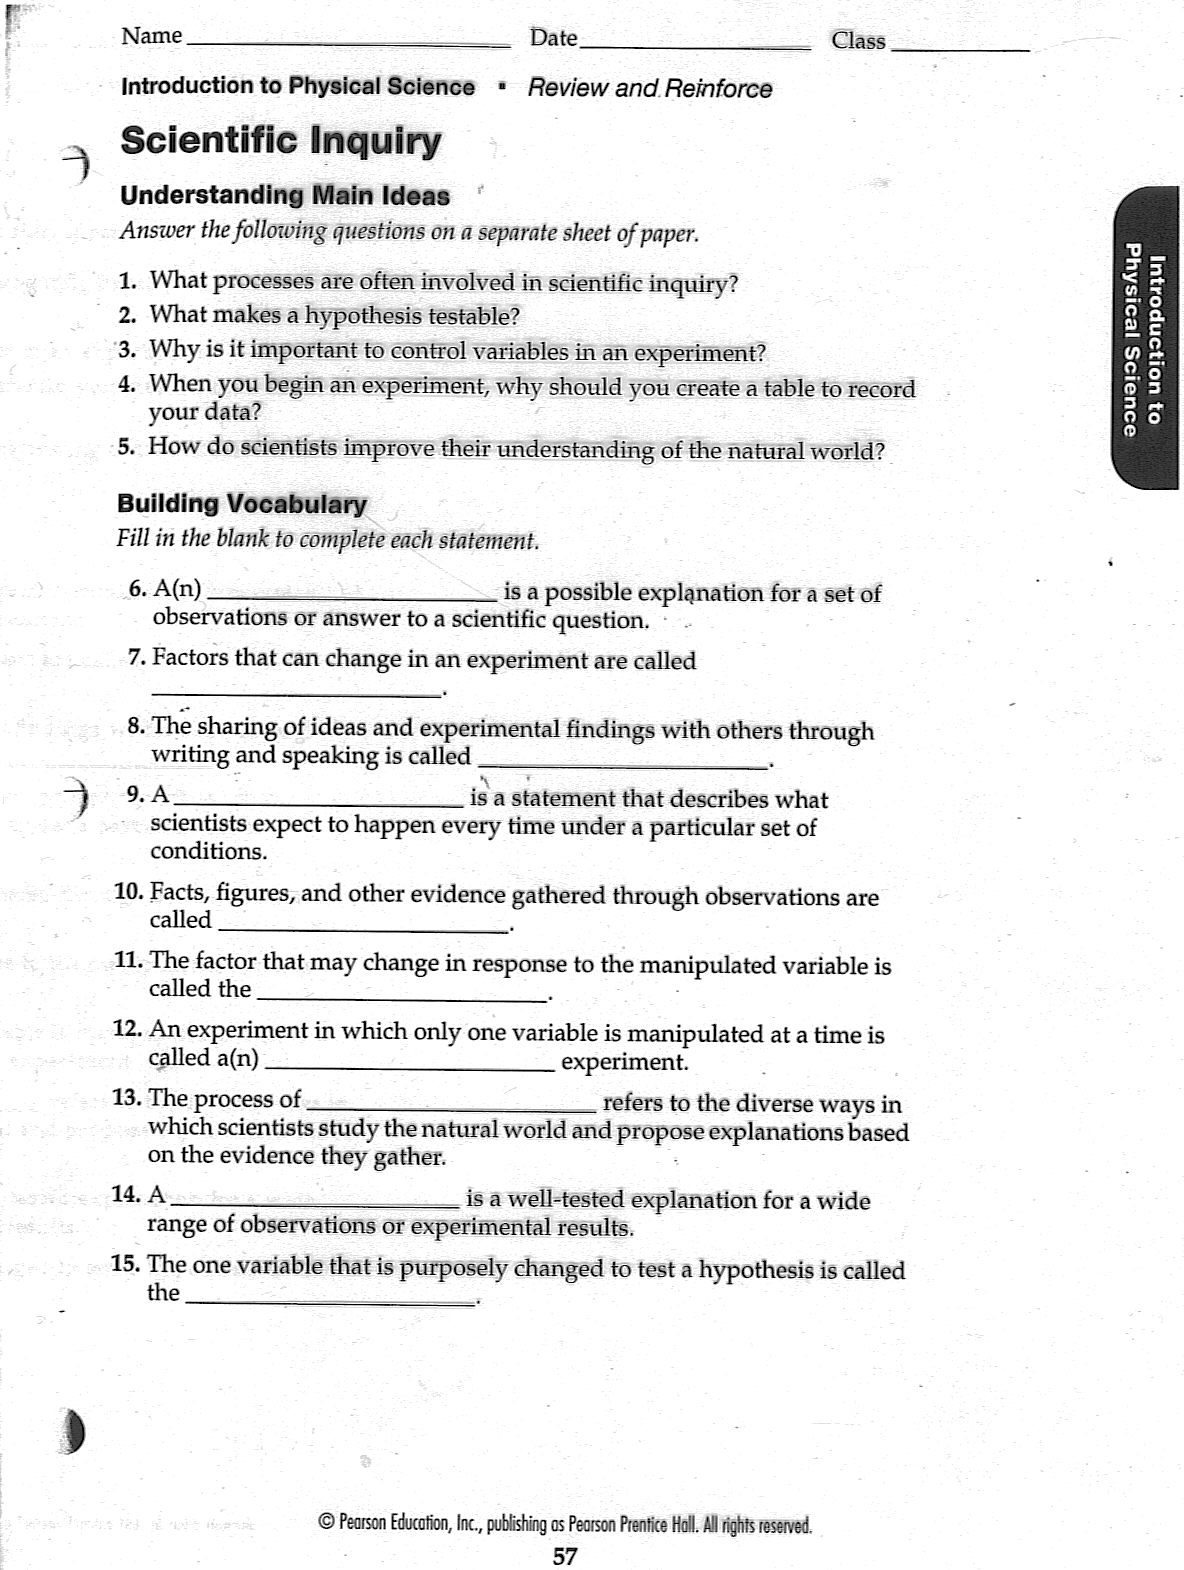 Physical Science Worksheets High School Image